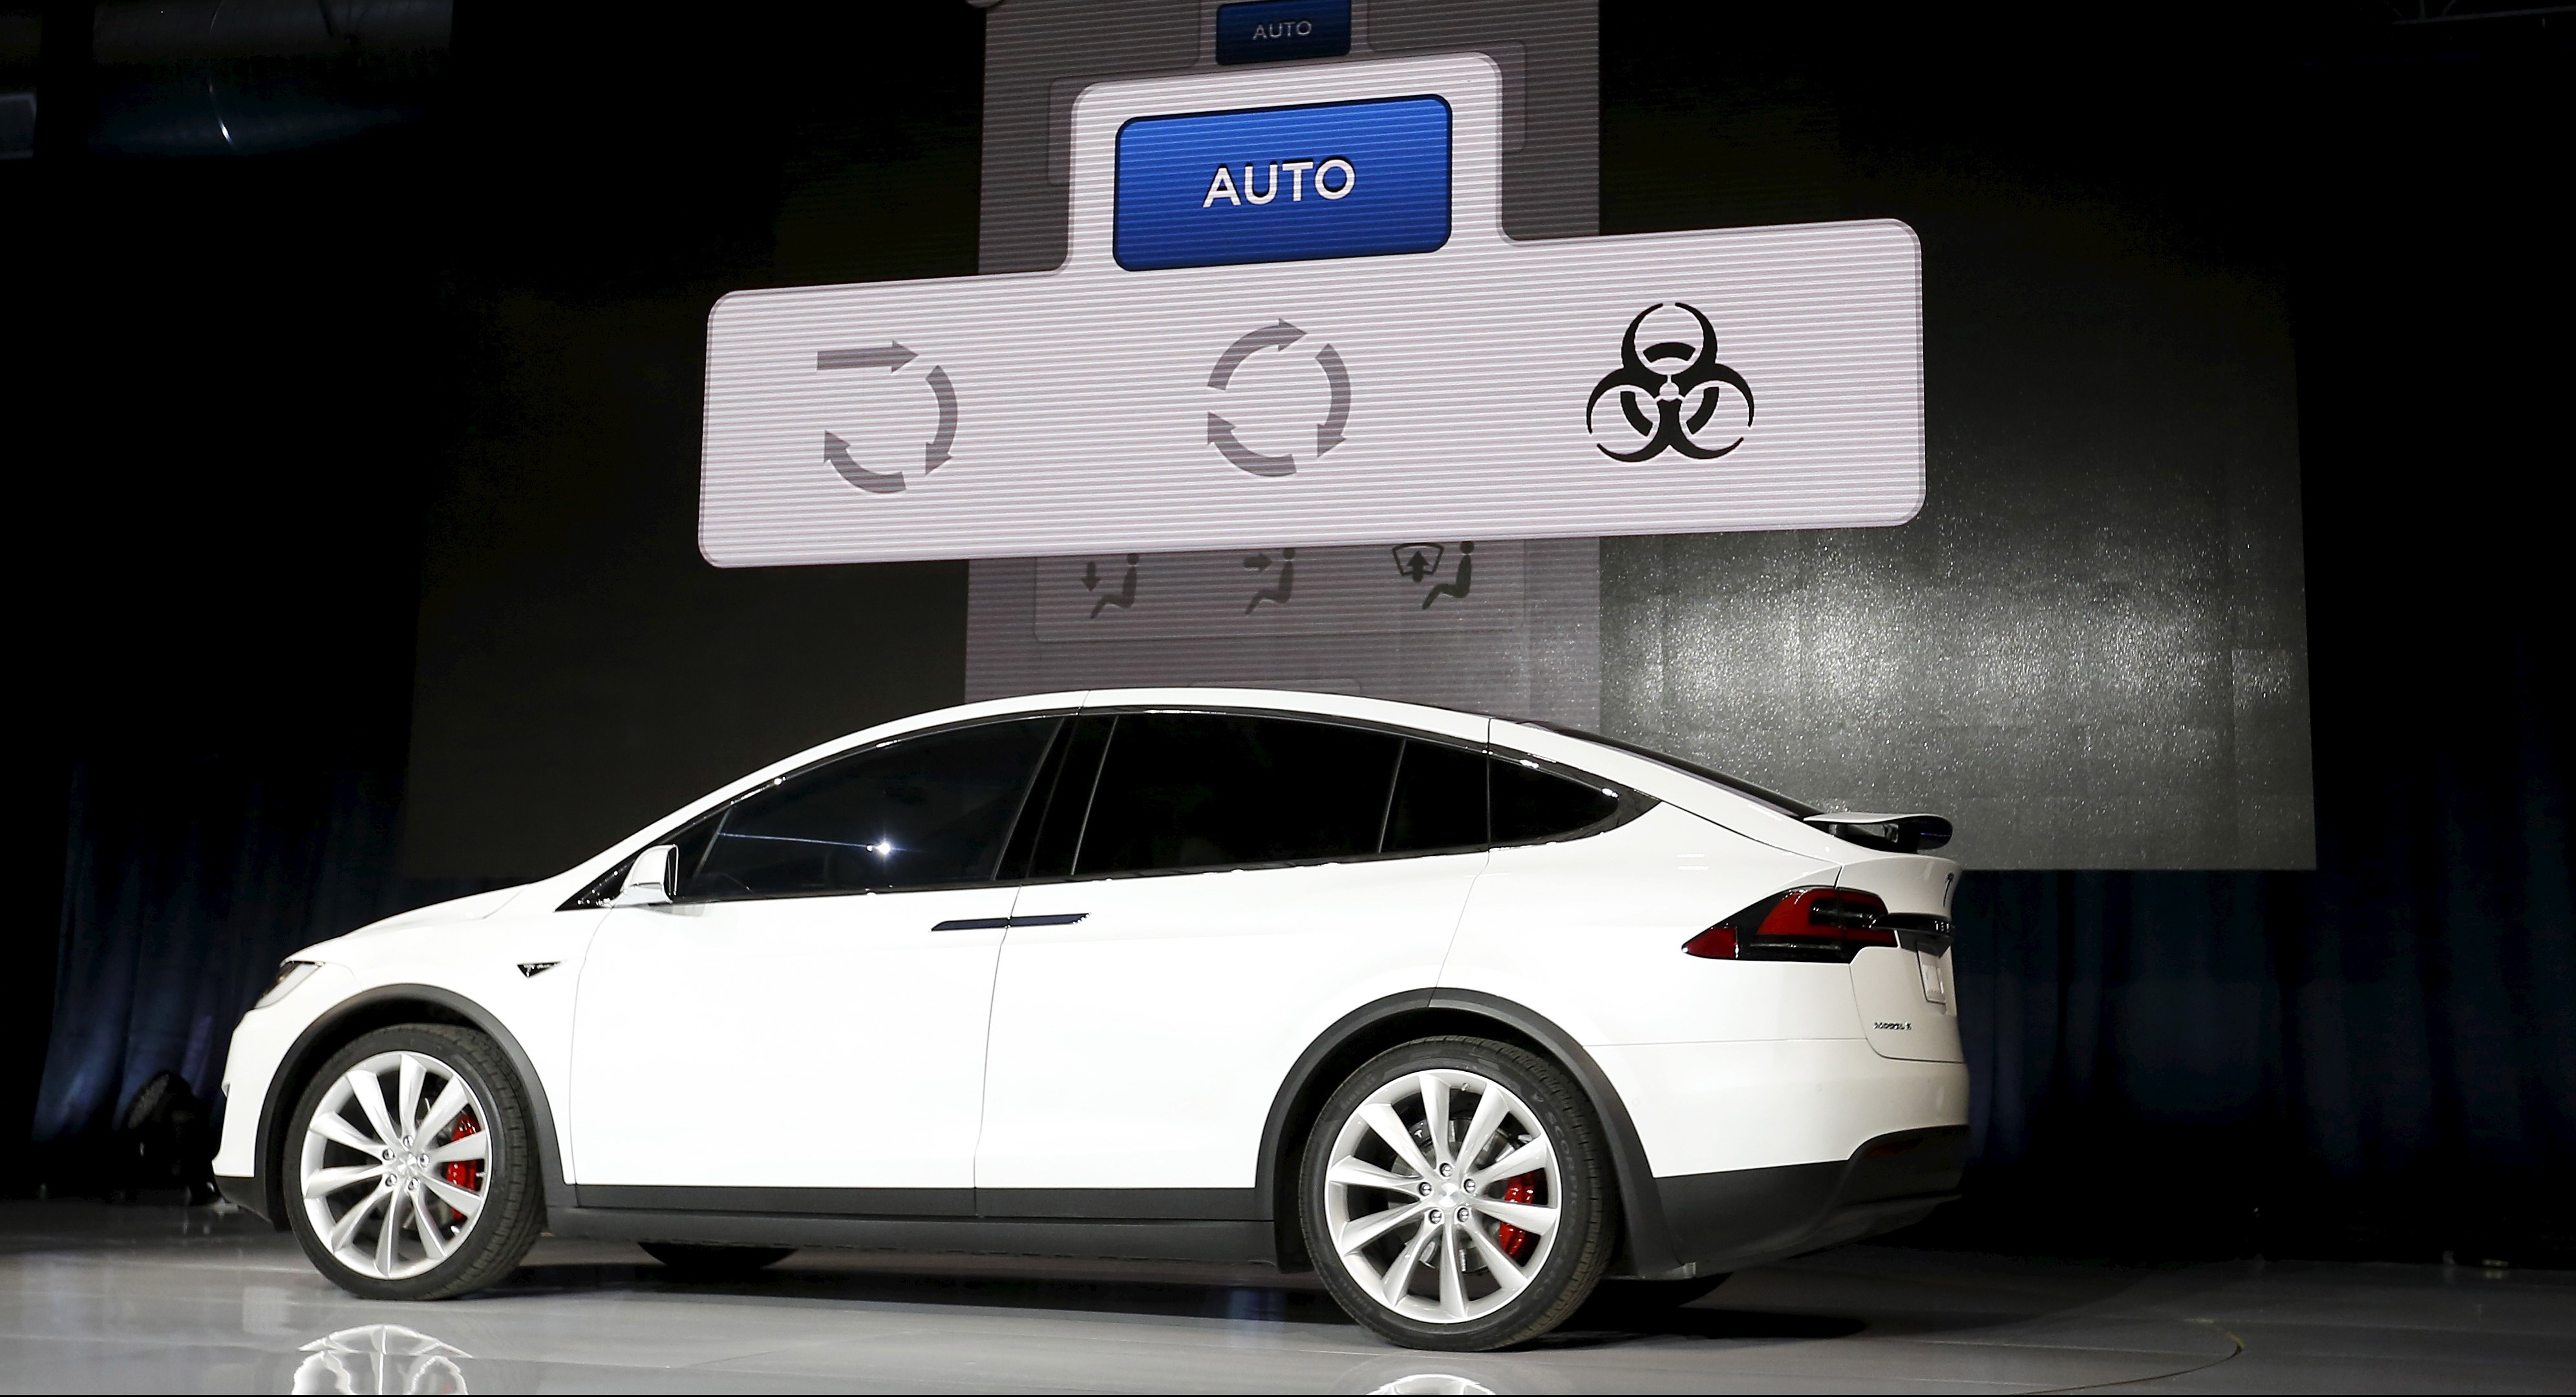 A Tesla Model X electric sports-utility vehicle is displayed during a presentation in Fremont, California September 29, 2015. Tesla Motors delivered the first of its long-awaited Model X electric sports-utility vehicles on Tuesday, a product investors are counting on to make the pioneering company profitable after years of losses. REUTERS/Stephen Lam - RTS2CQA